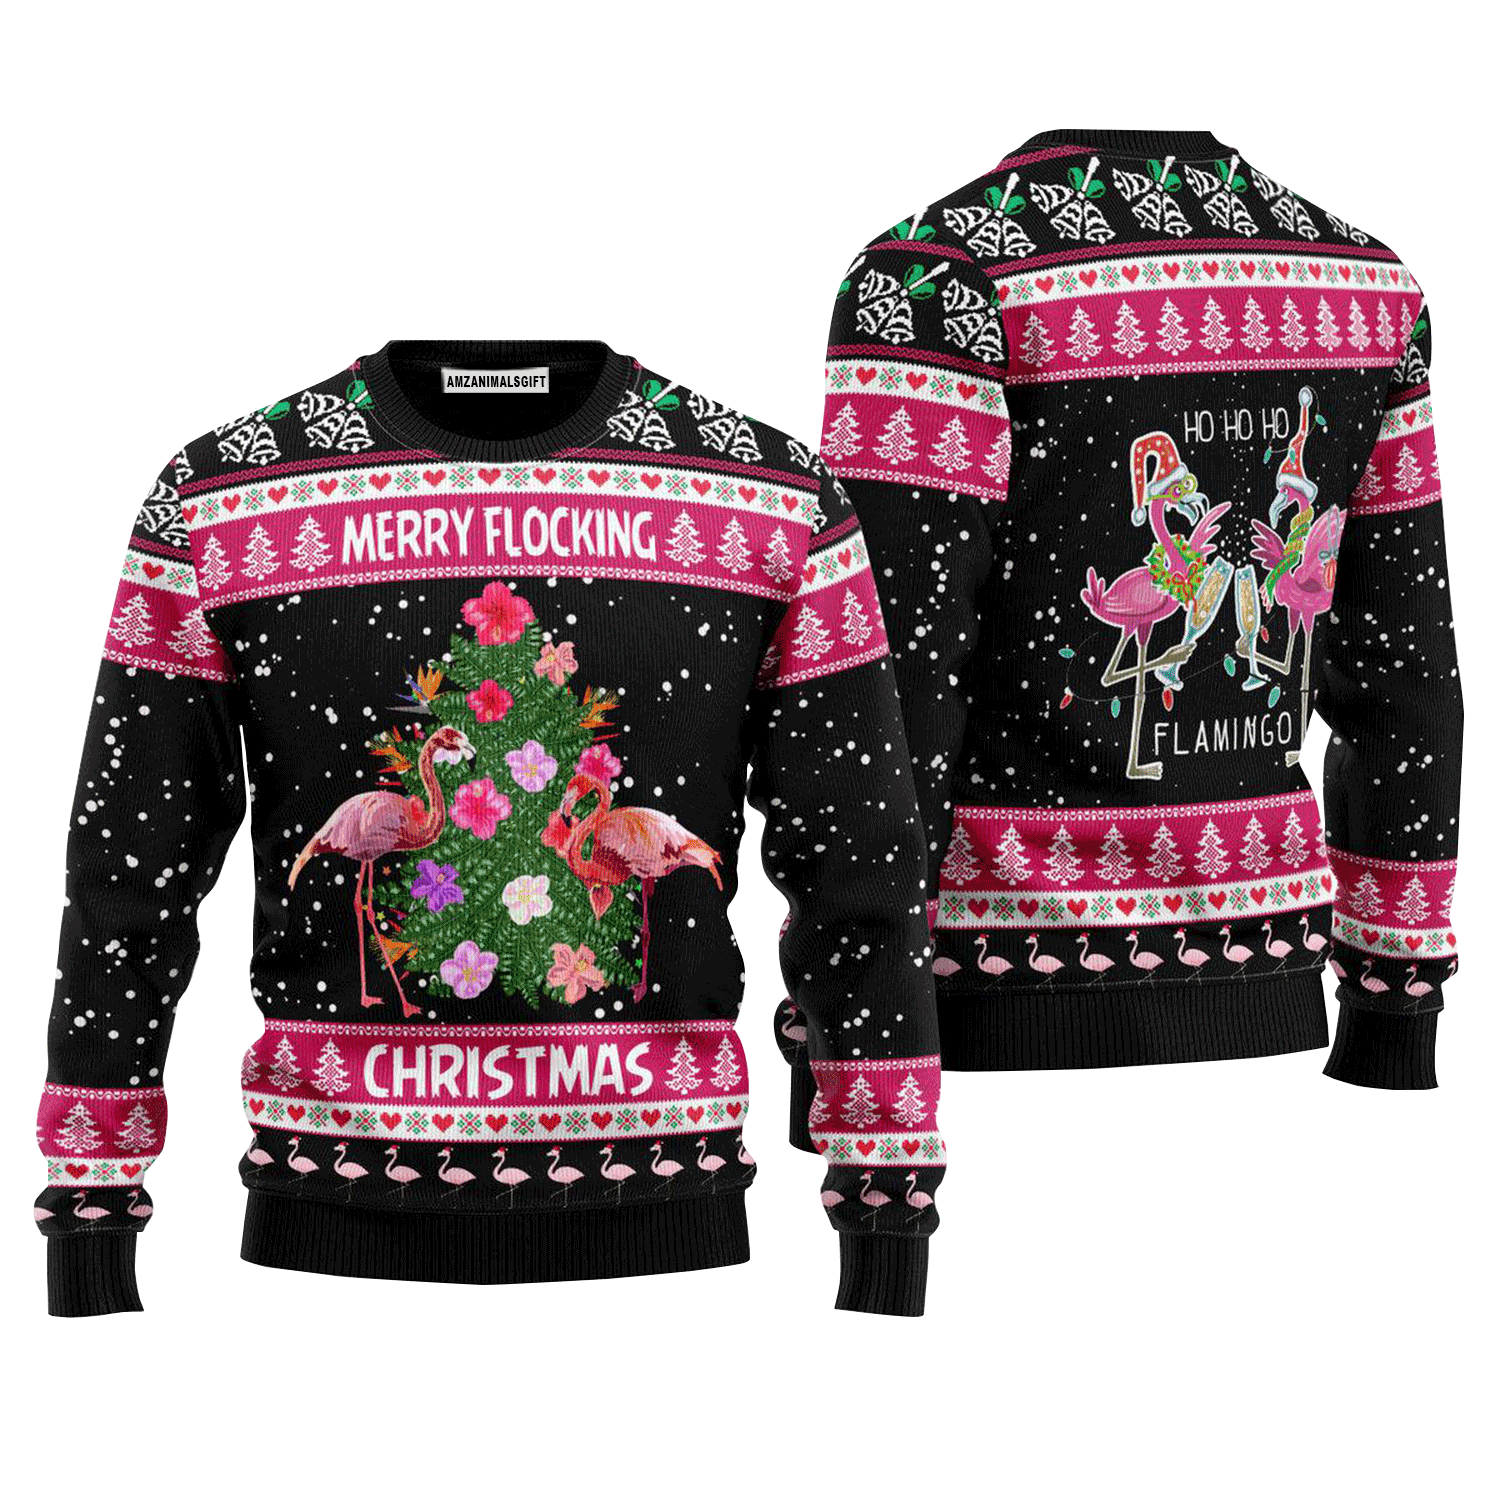 Funny Flamingo Sweater Mery Flocking Christmas, Ugly Sweater For Men & Women, Perfect Outfit For Christmas New Year Autumn Winter